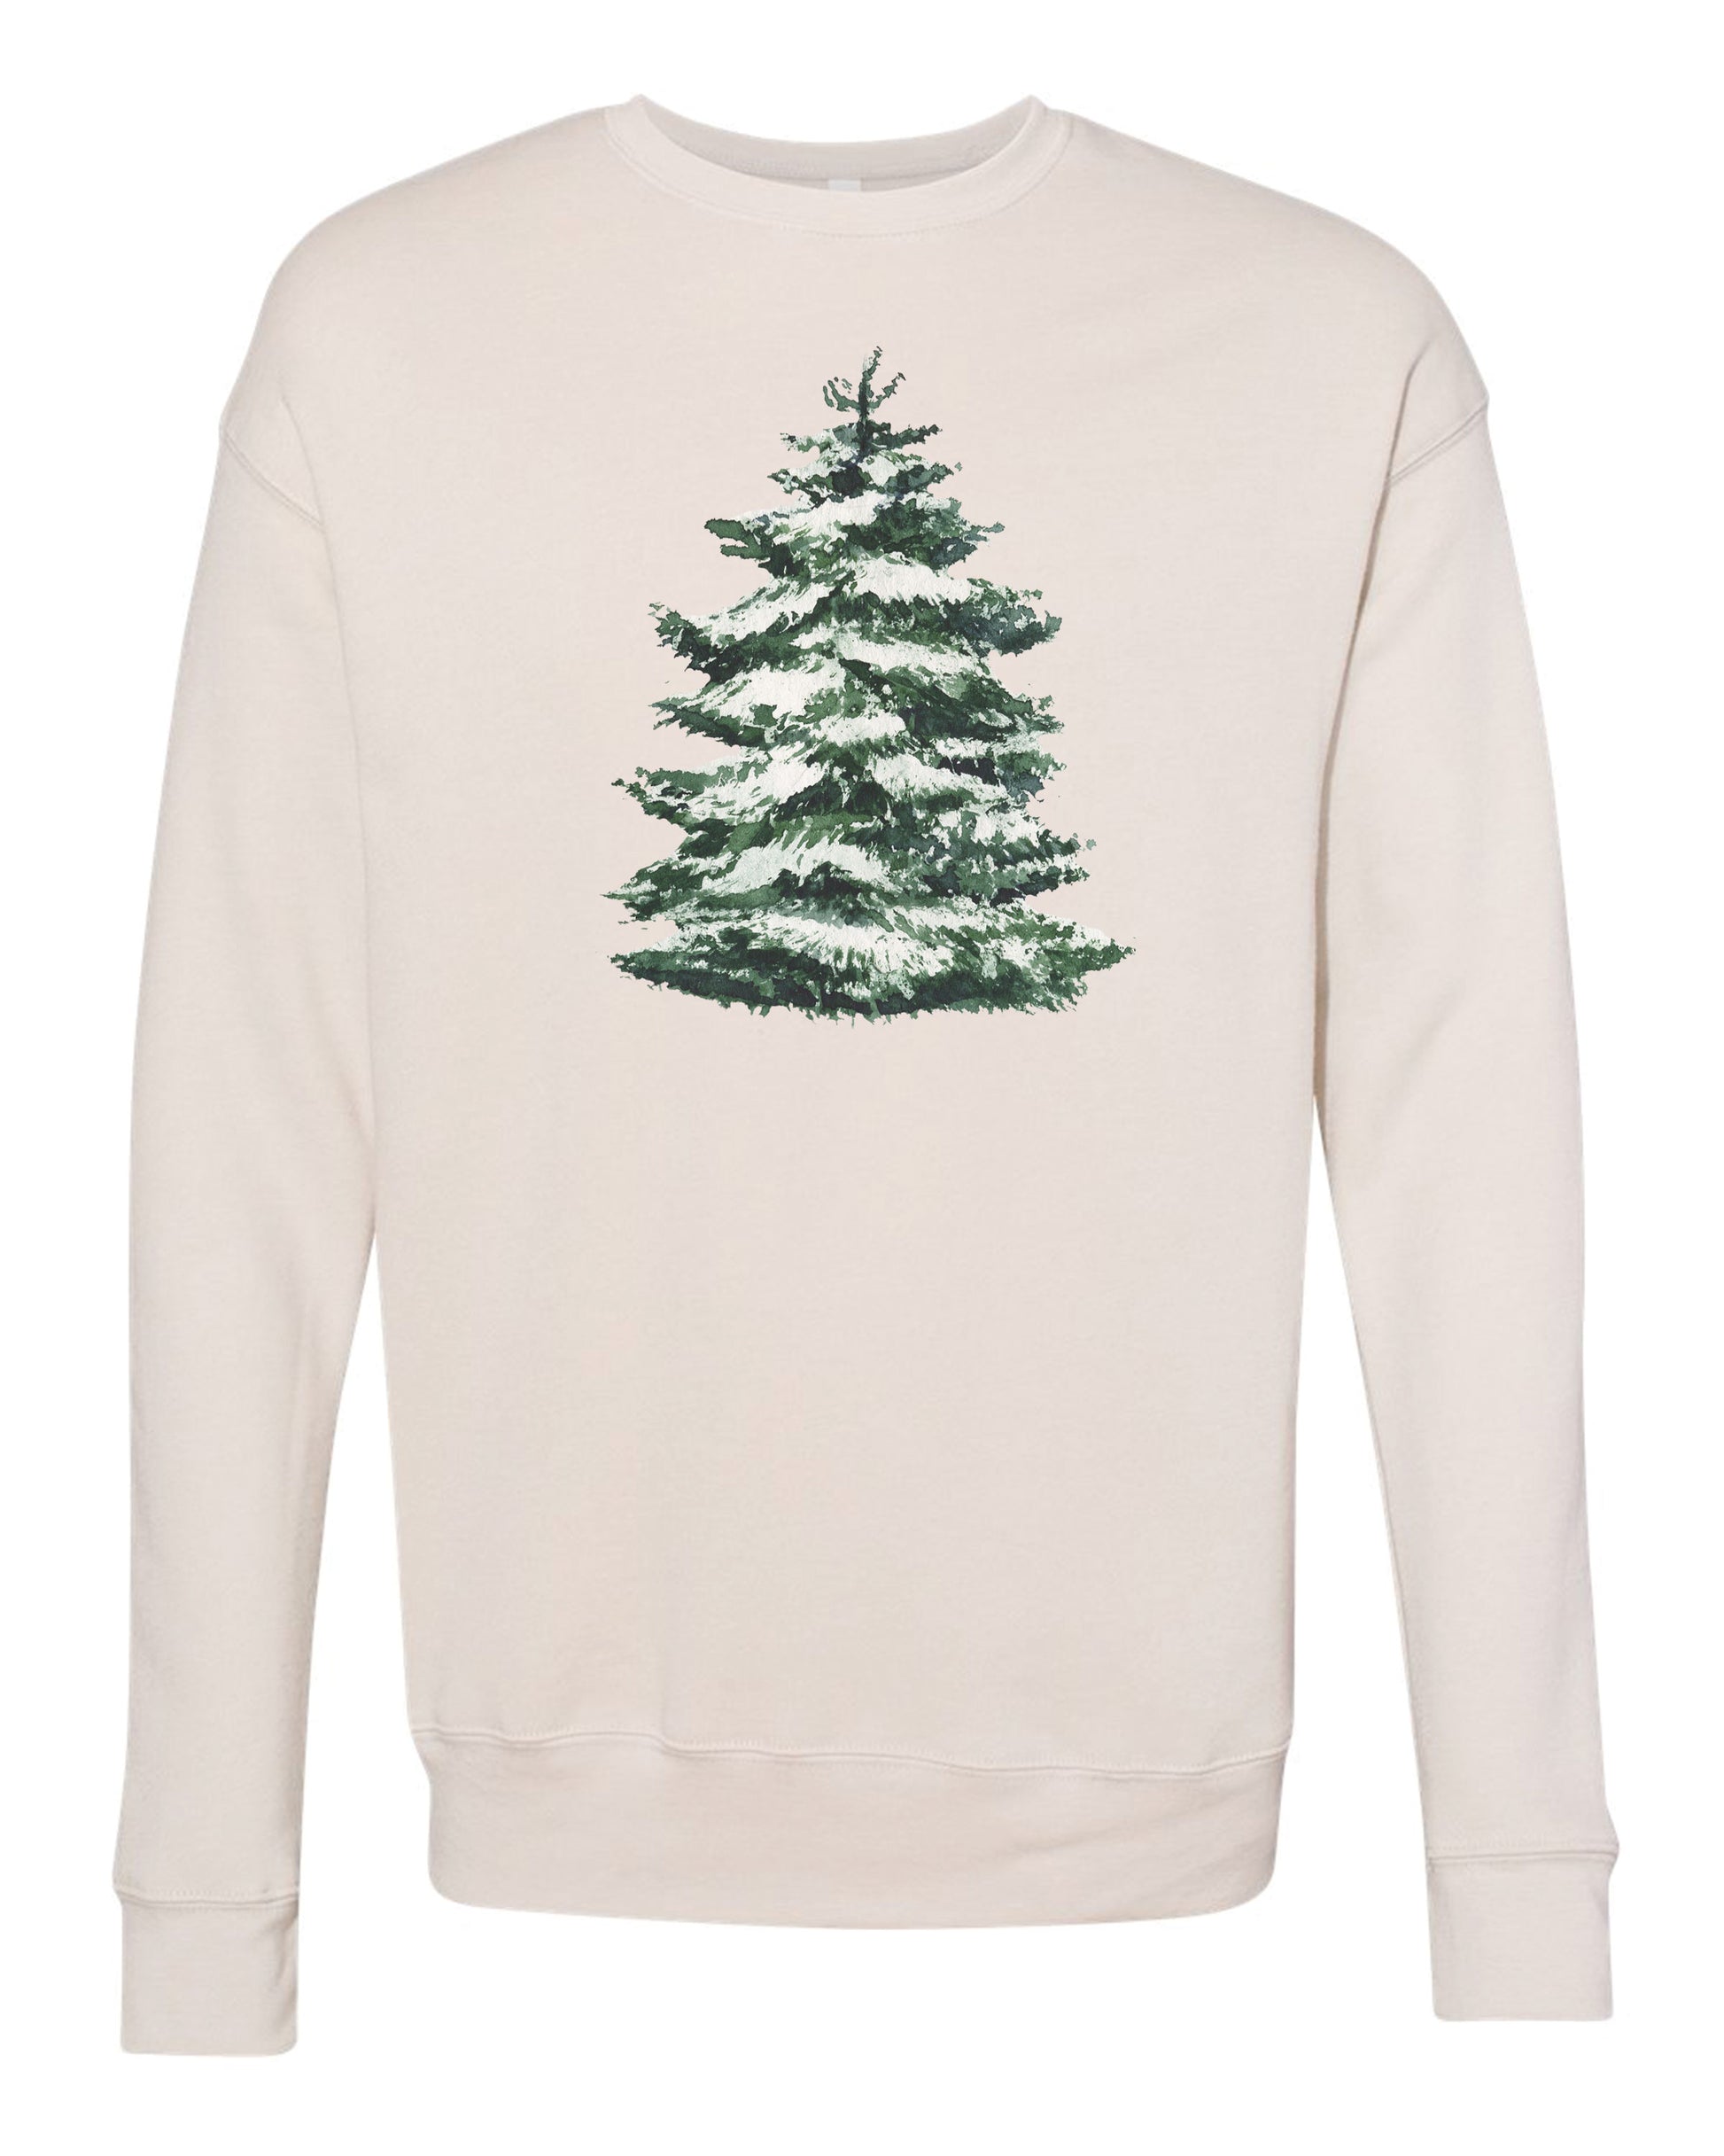 Winter Tree | Adult Pullover-Adult Pullover-Sister Shirts-Sister Shirts, Cute & Custom Tees for Mama & Littles in Trussville, Alabama.